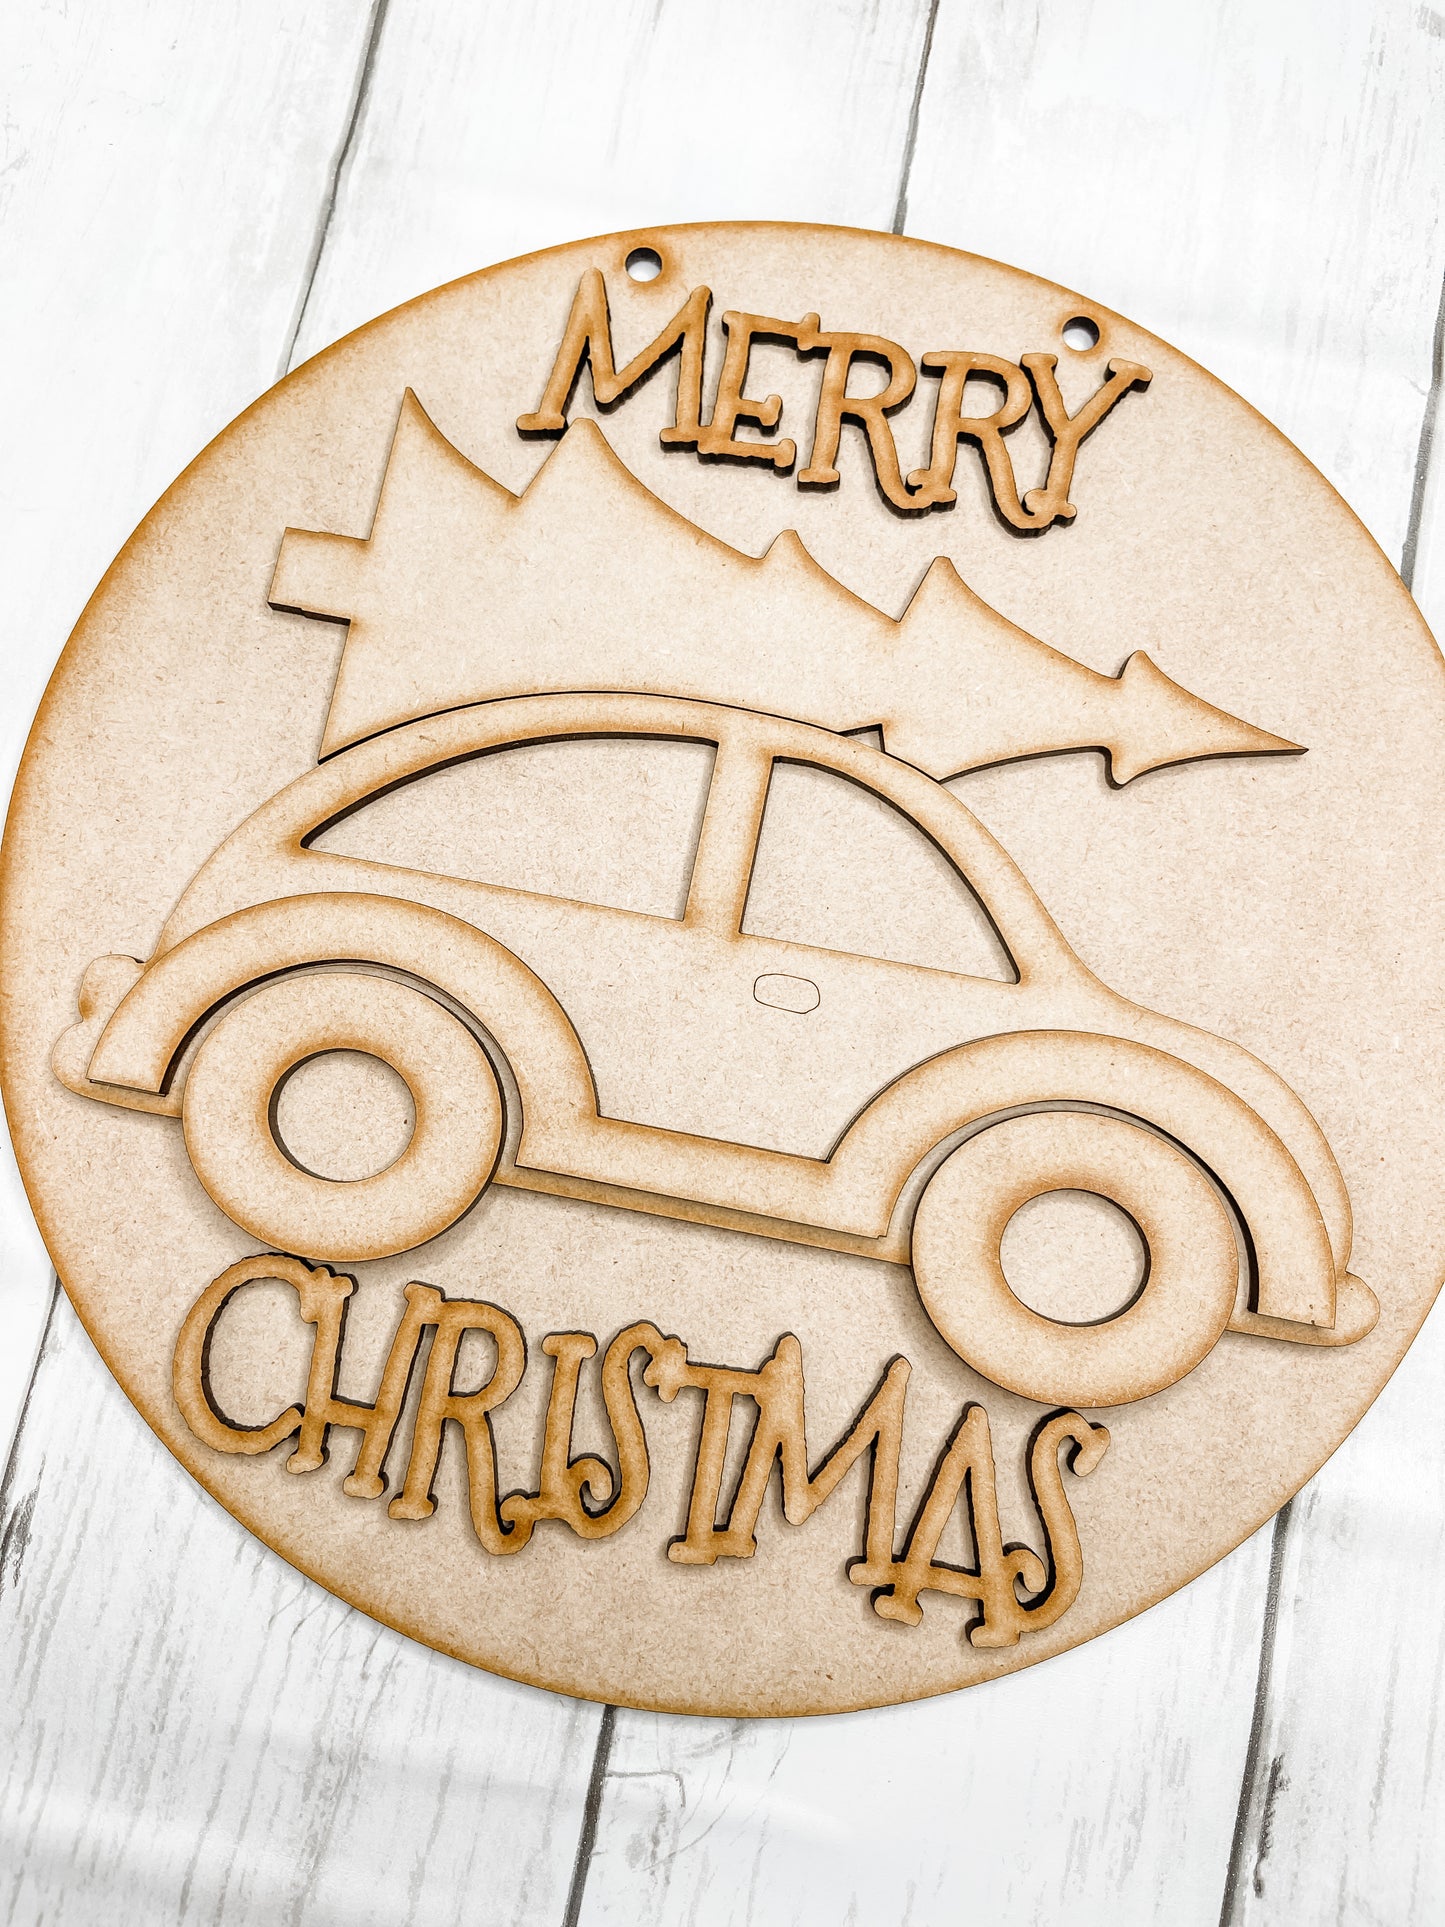 9 in round Merry Christmas VW Car Sign DIY Kit